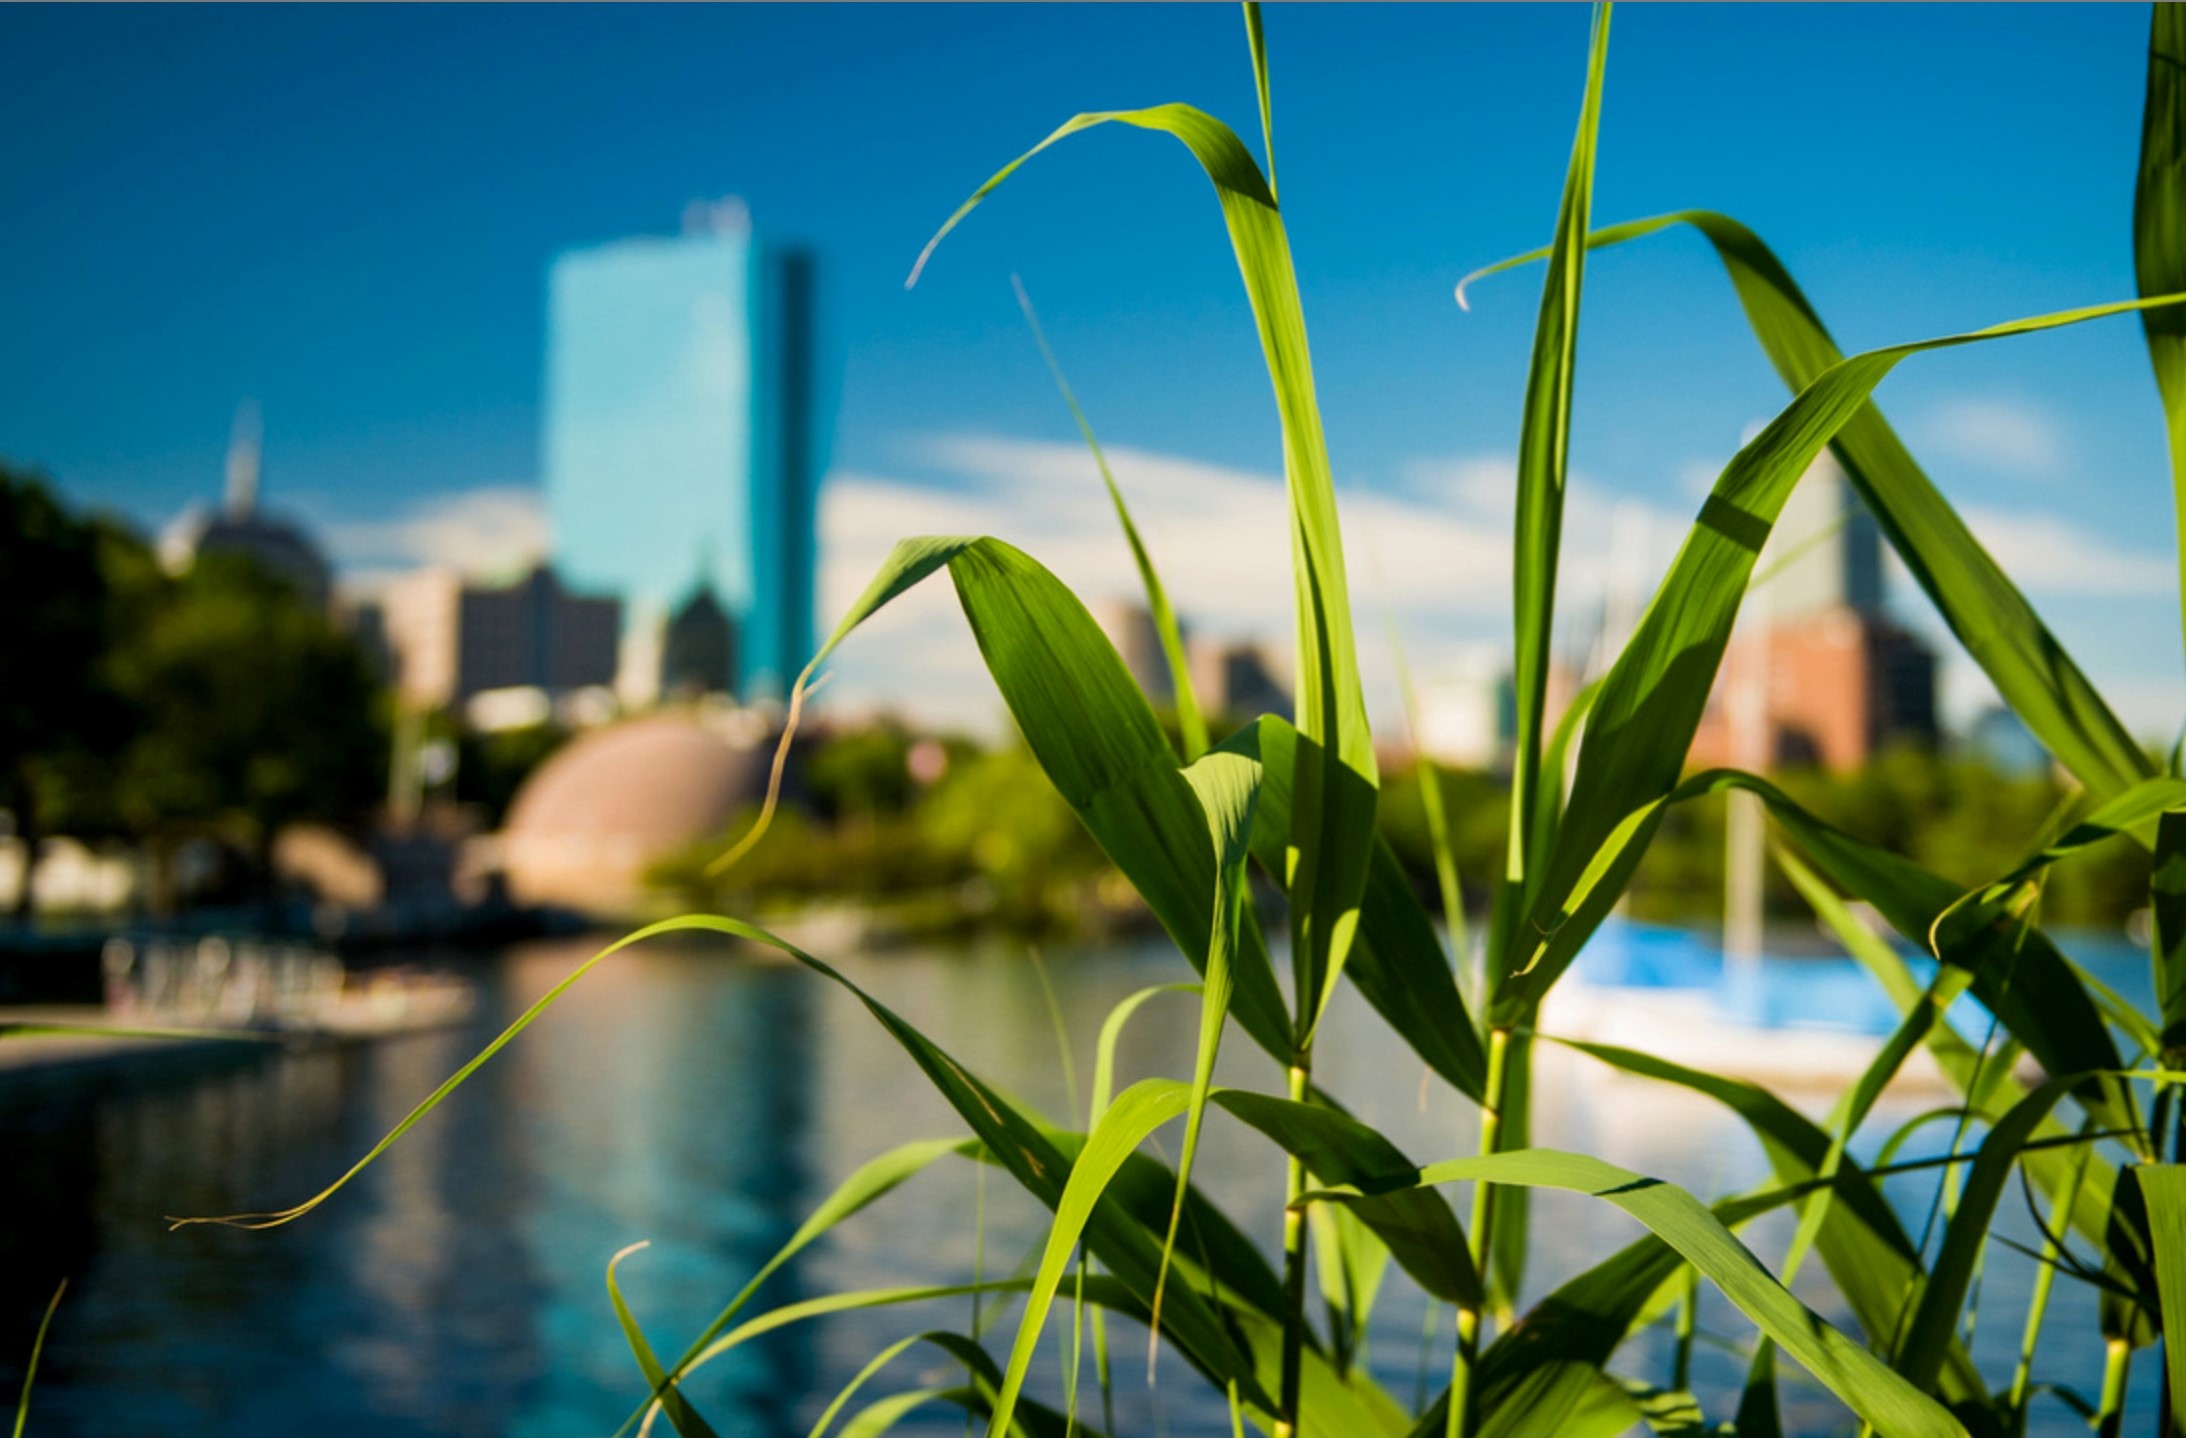 Stalks of tall grass with a river and city skyline in the background.